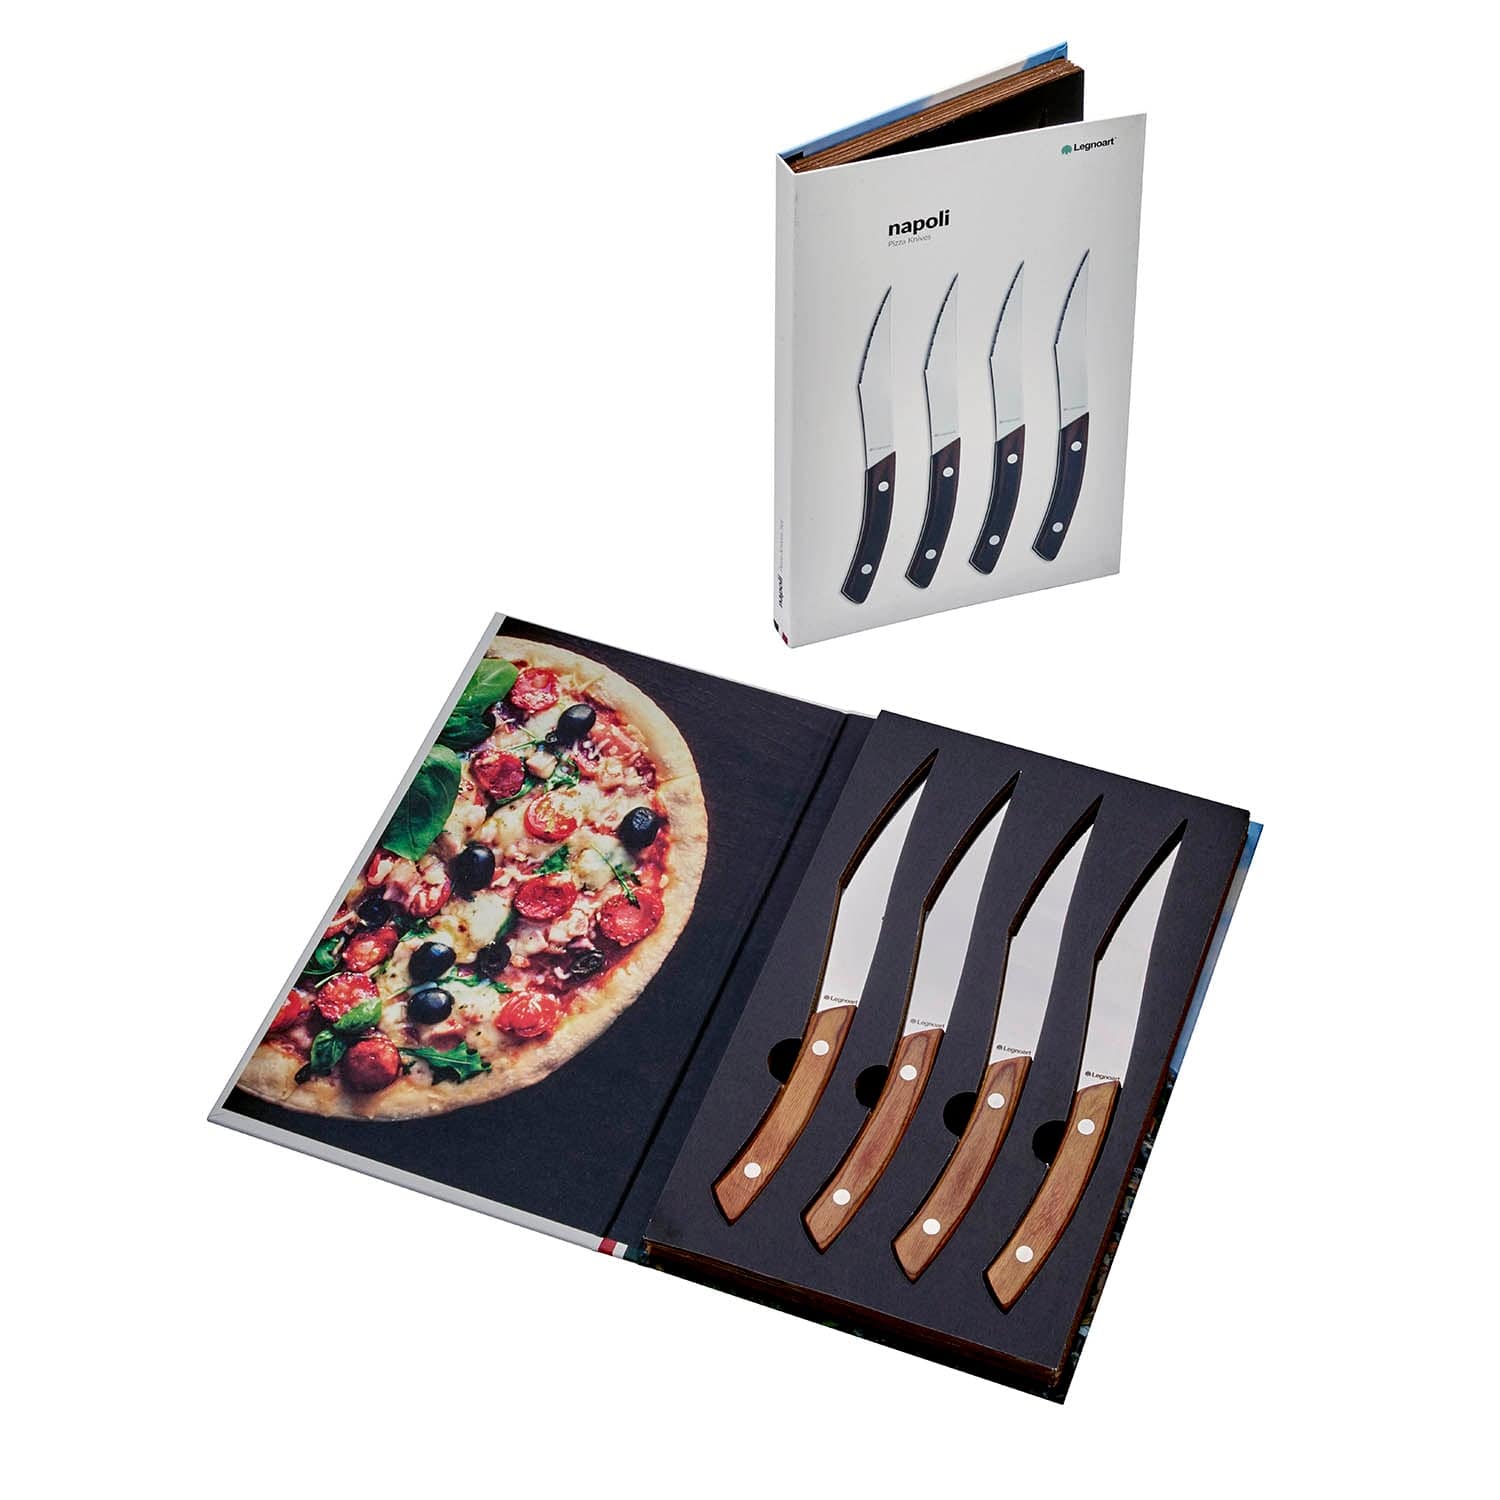 Legnoart Napoli Set Of 4 Pizza Knives Stainless Steel Dark Handle Pk-10A